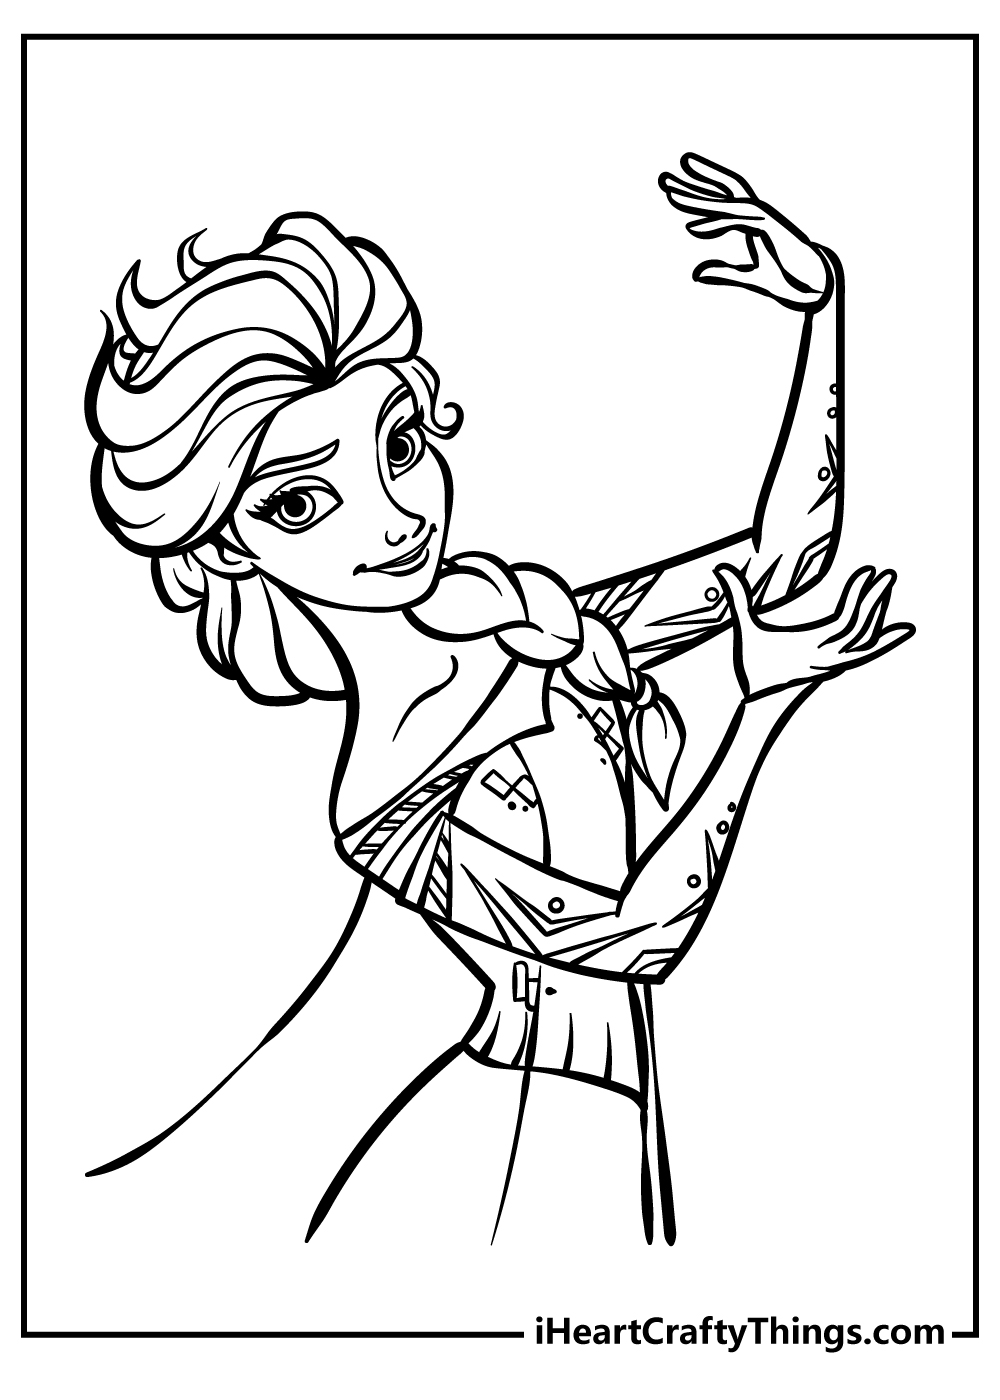 Elsa Coloring Book for adults free download